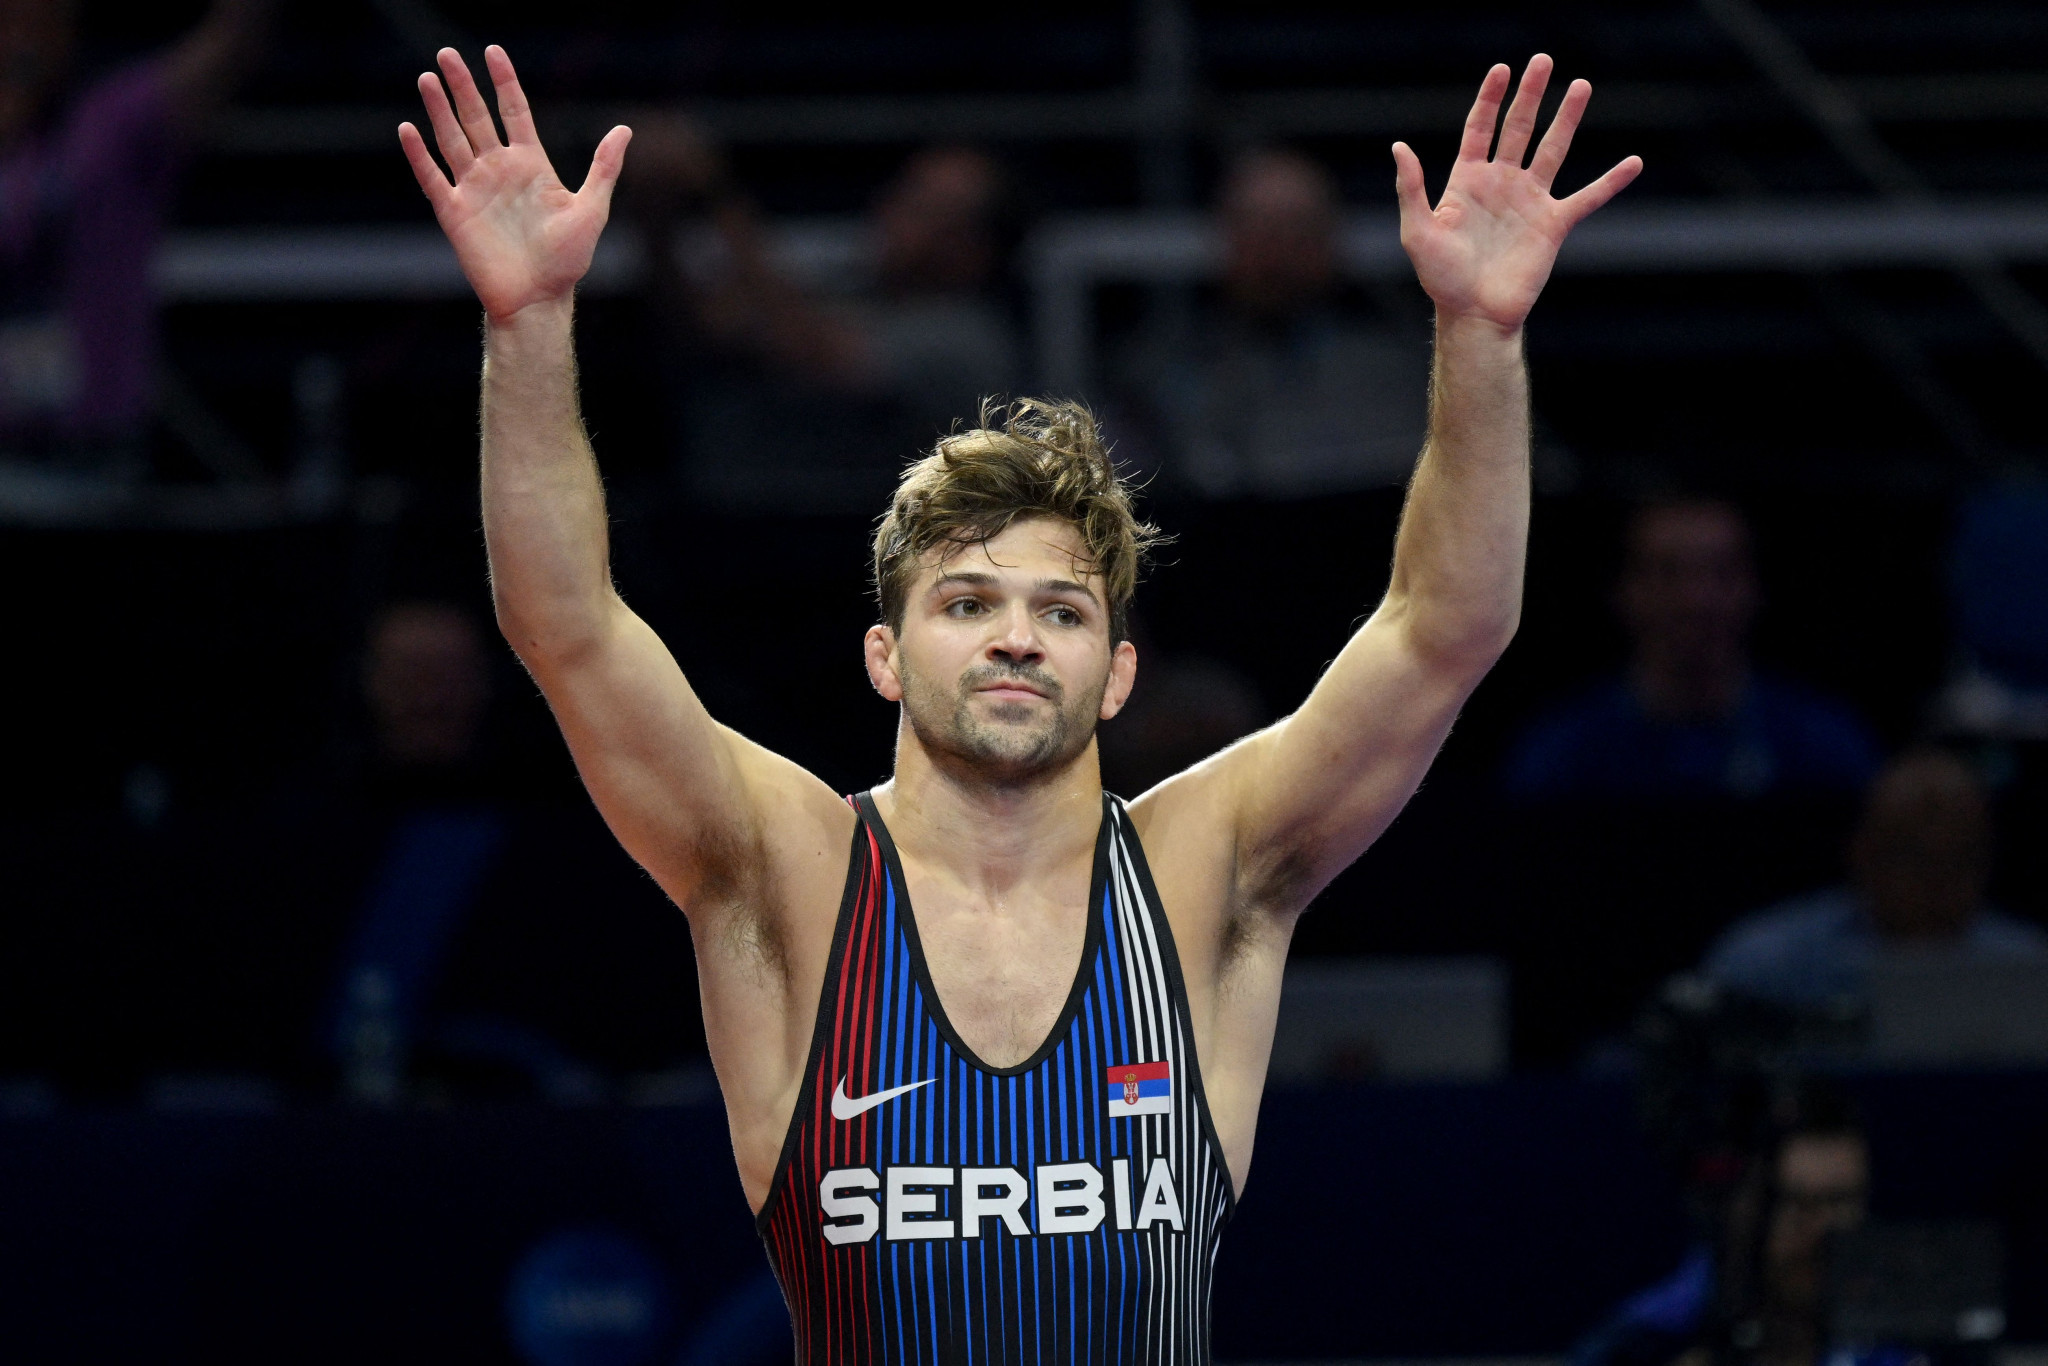 Mićić sends home crowd wild with historic gold at World Wrestling Championships